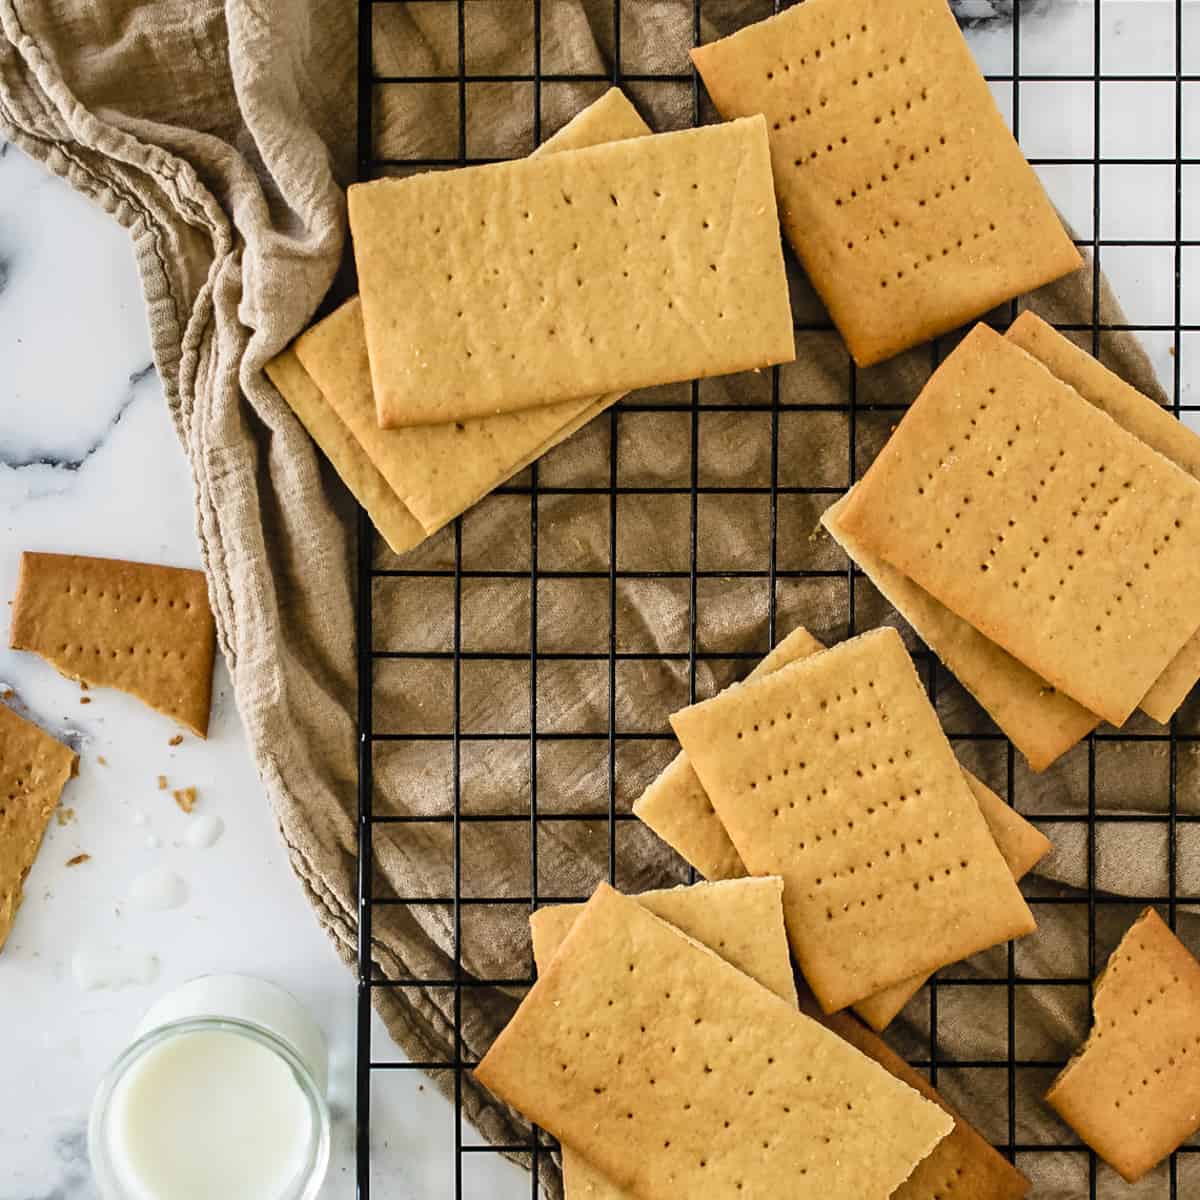 Graham crackers on a baking rack next to a glass of milk.